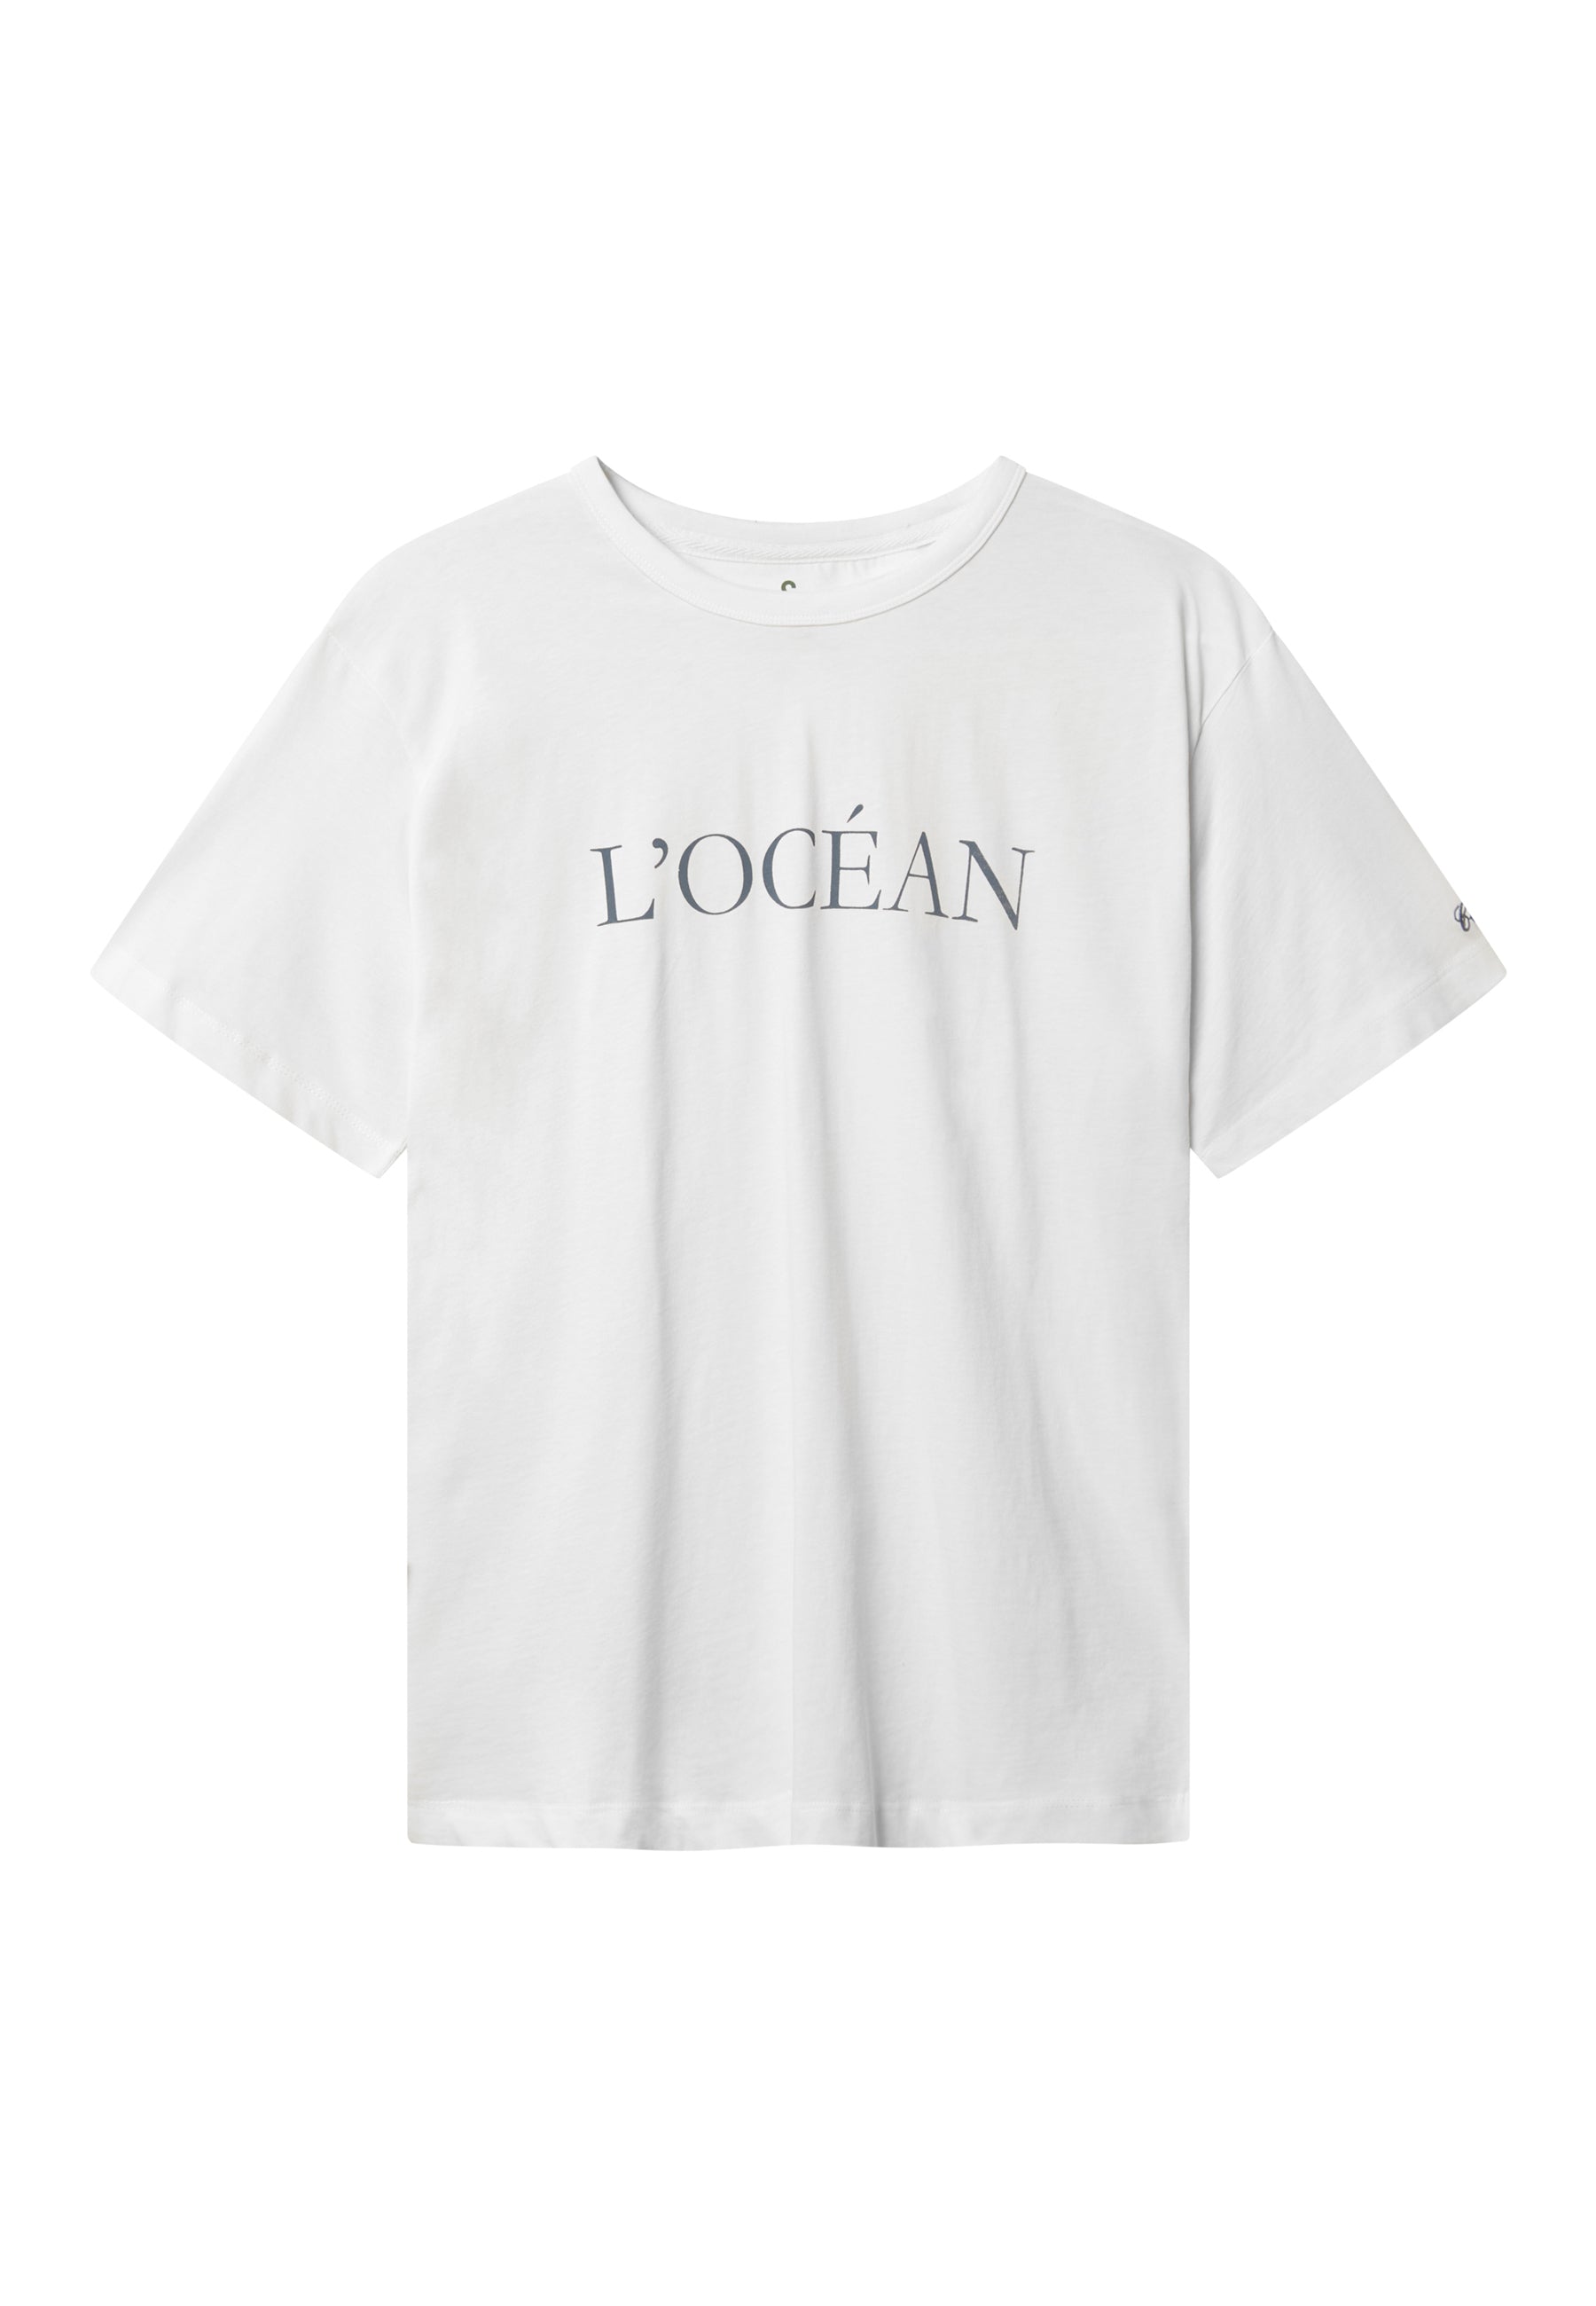 T-Shirt-L´Ocean in White T-Shirts Colours and Sons   